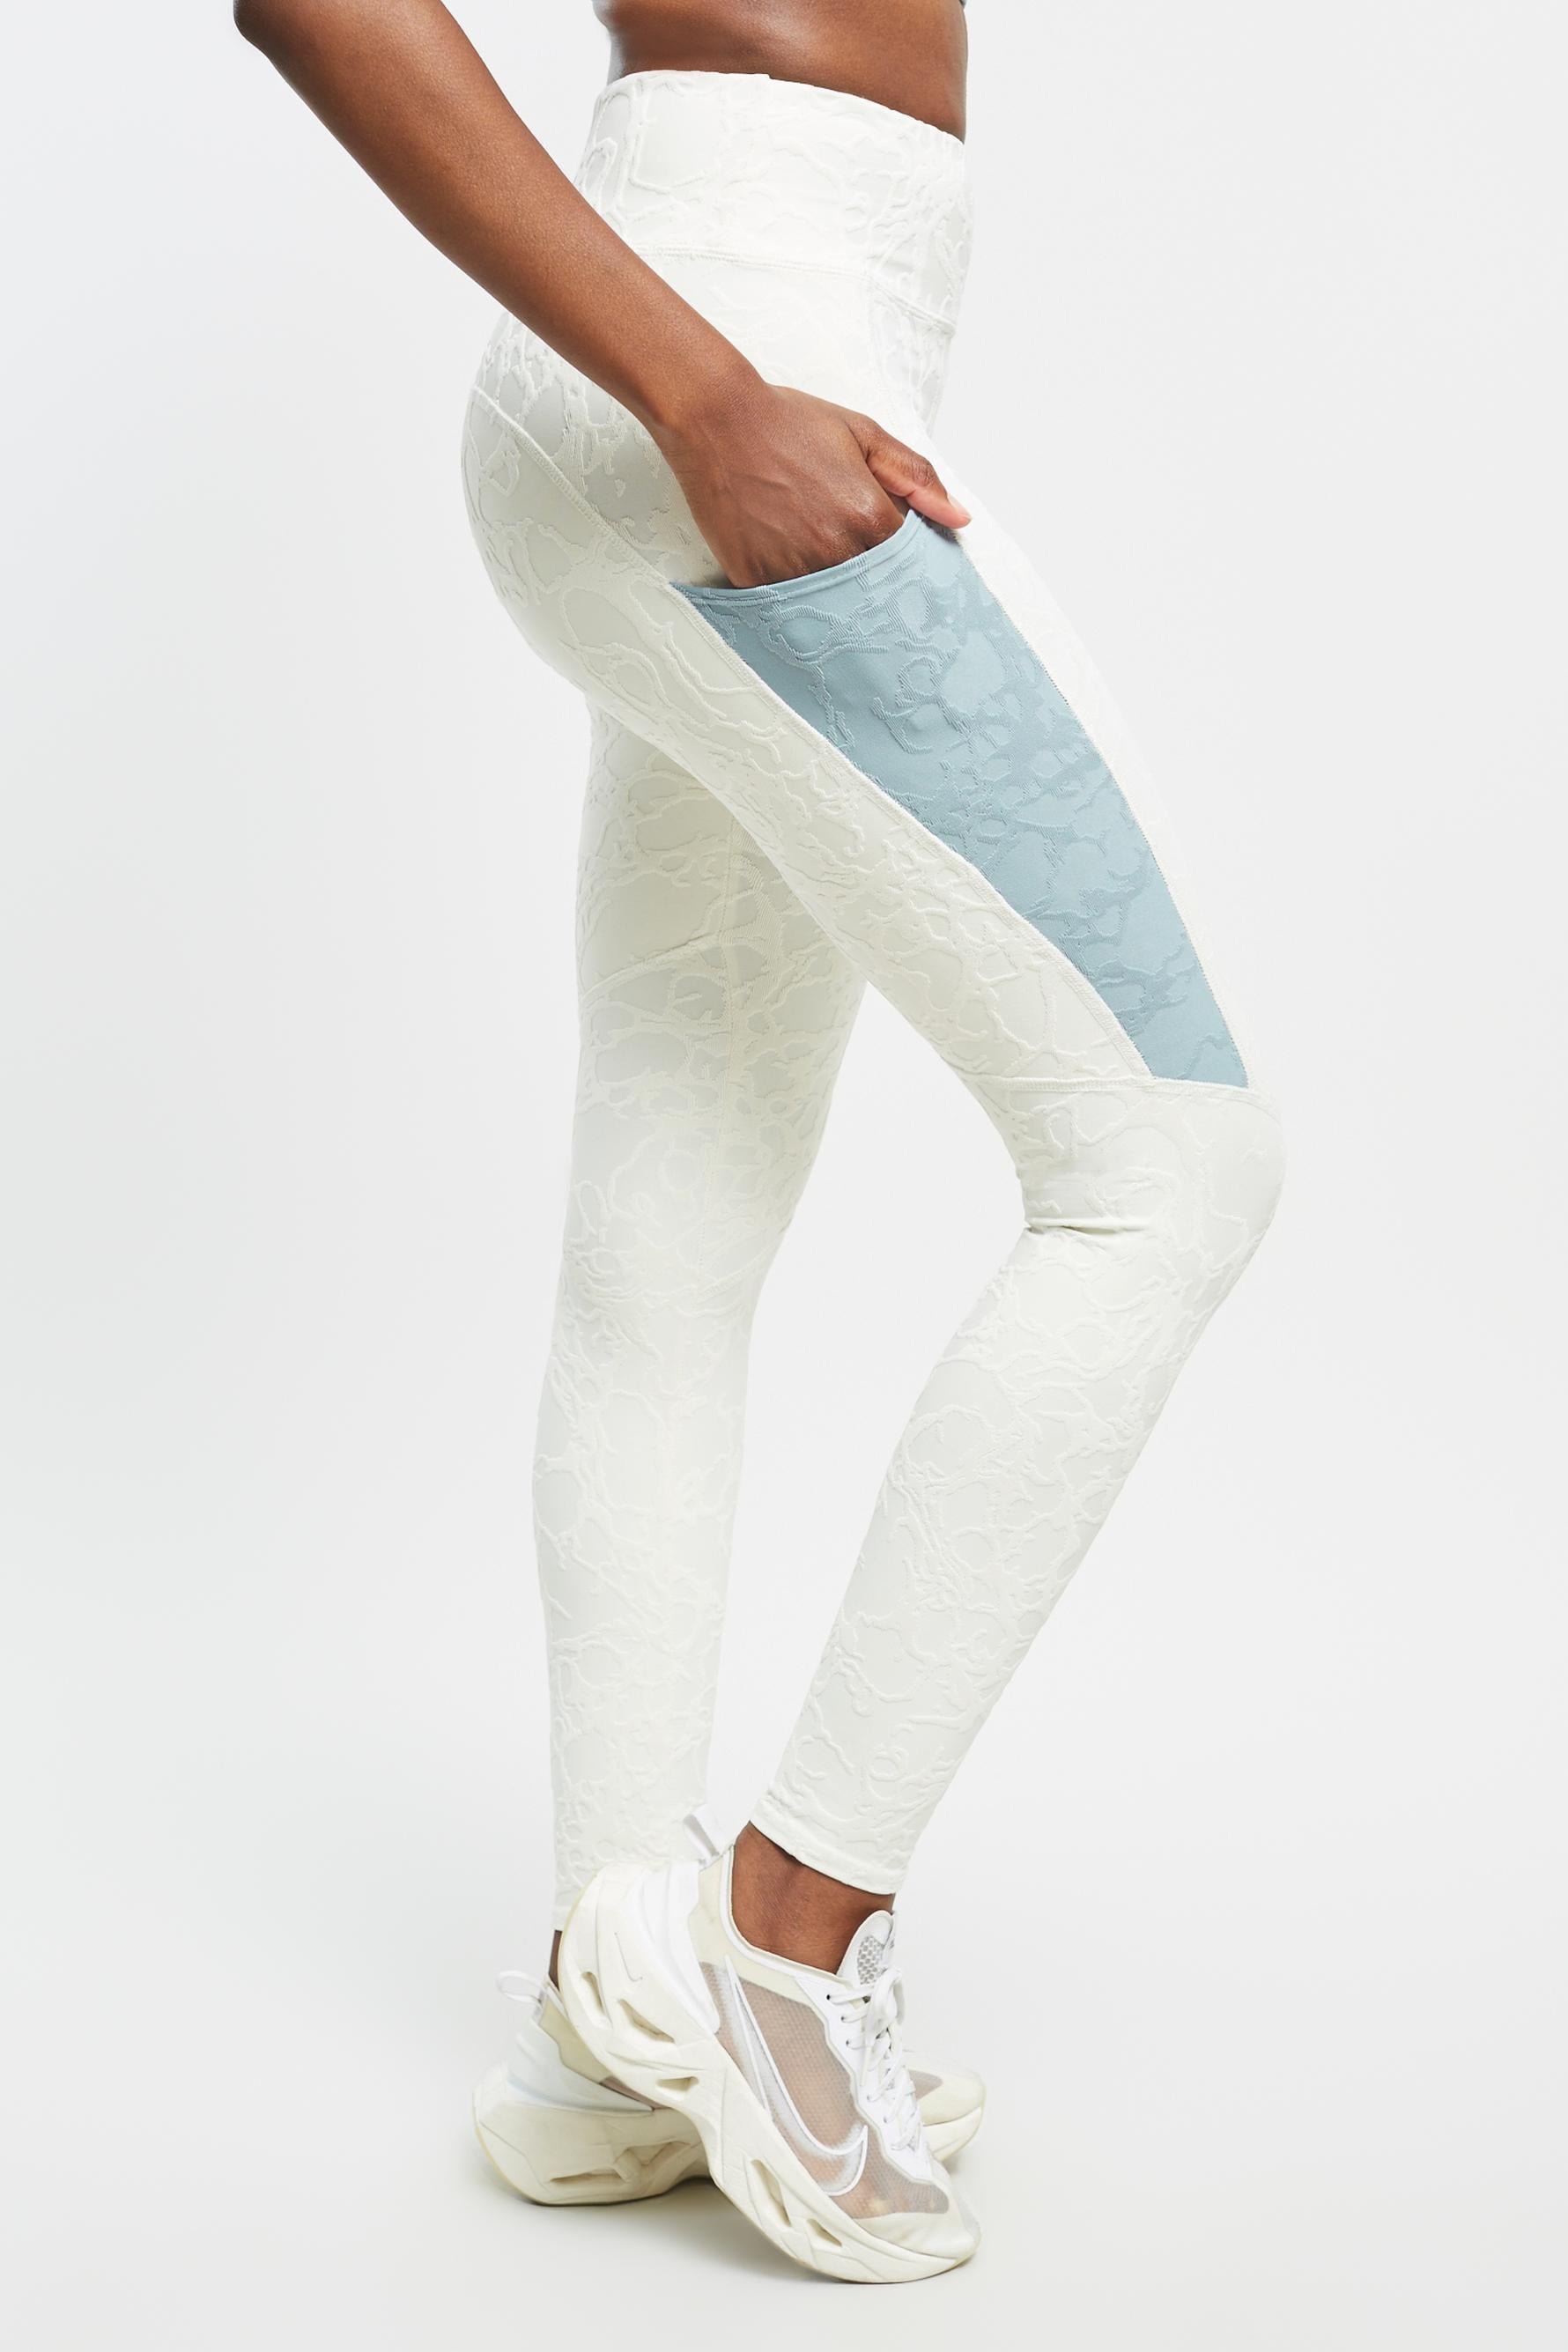 Twenty Montréal Seafoam 3D Activewear High Waist Leggings, These 49  Fitness Deals Will Have You Even More Excited For Labour Day Weekend